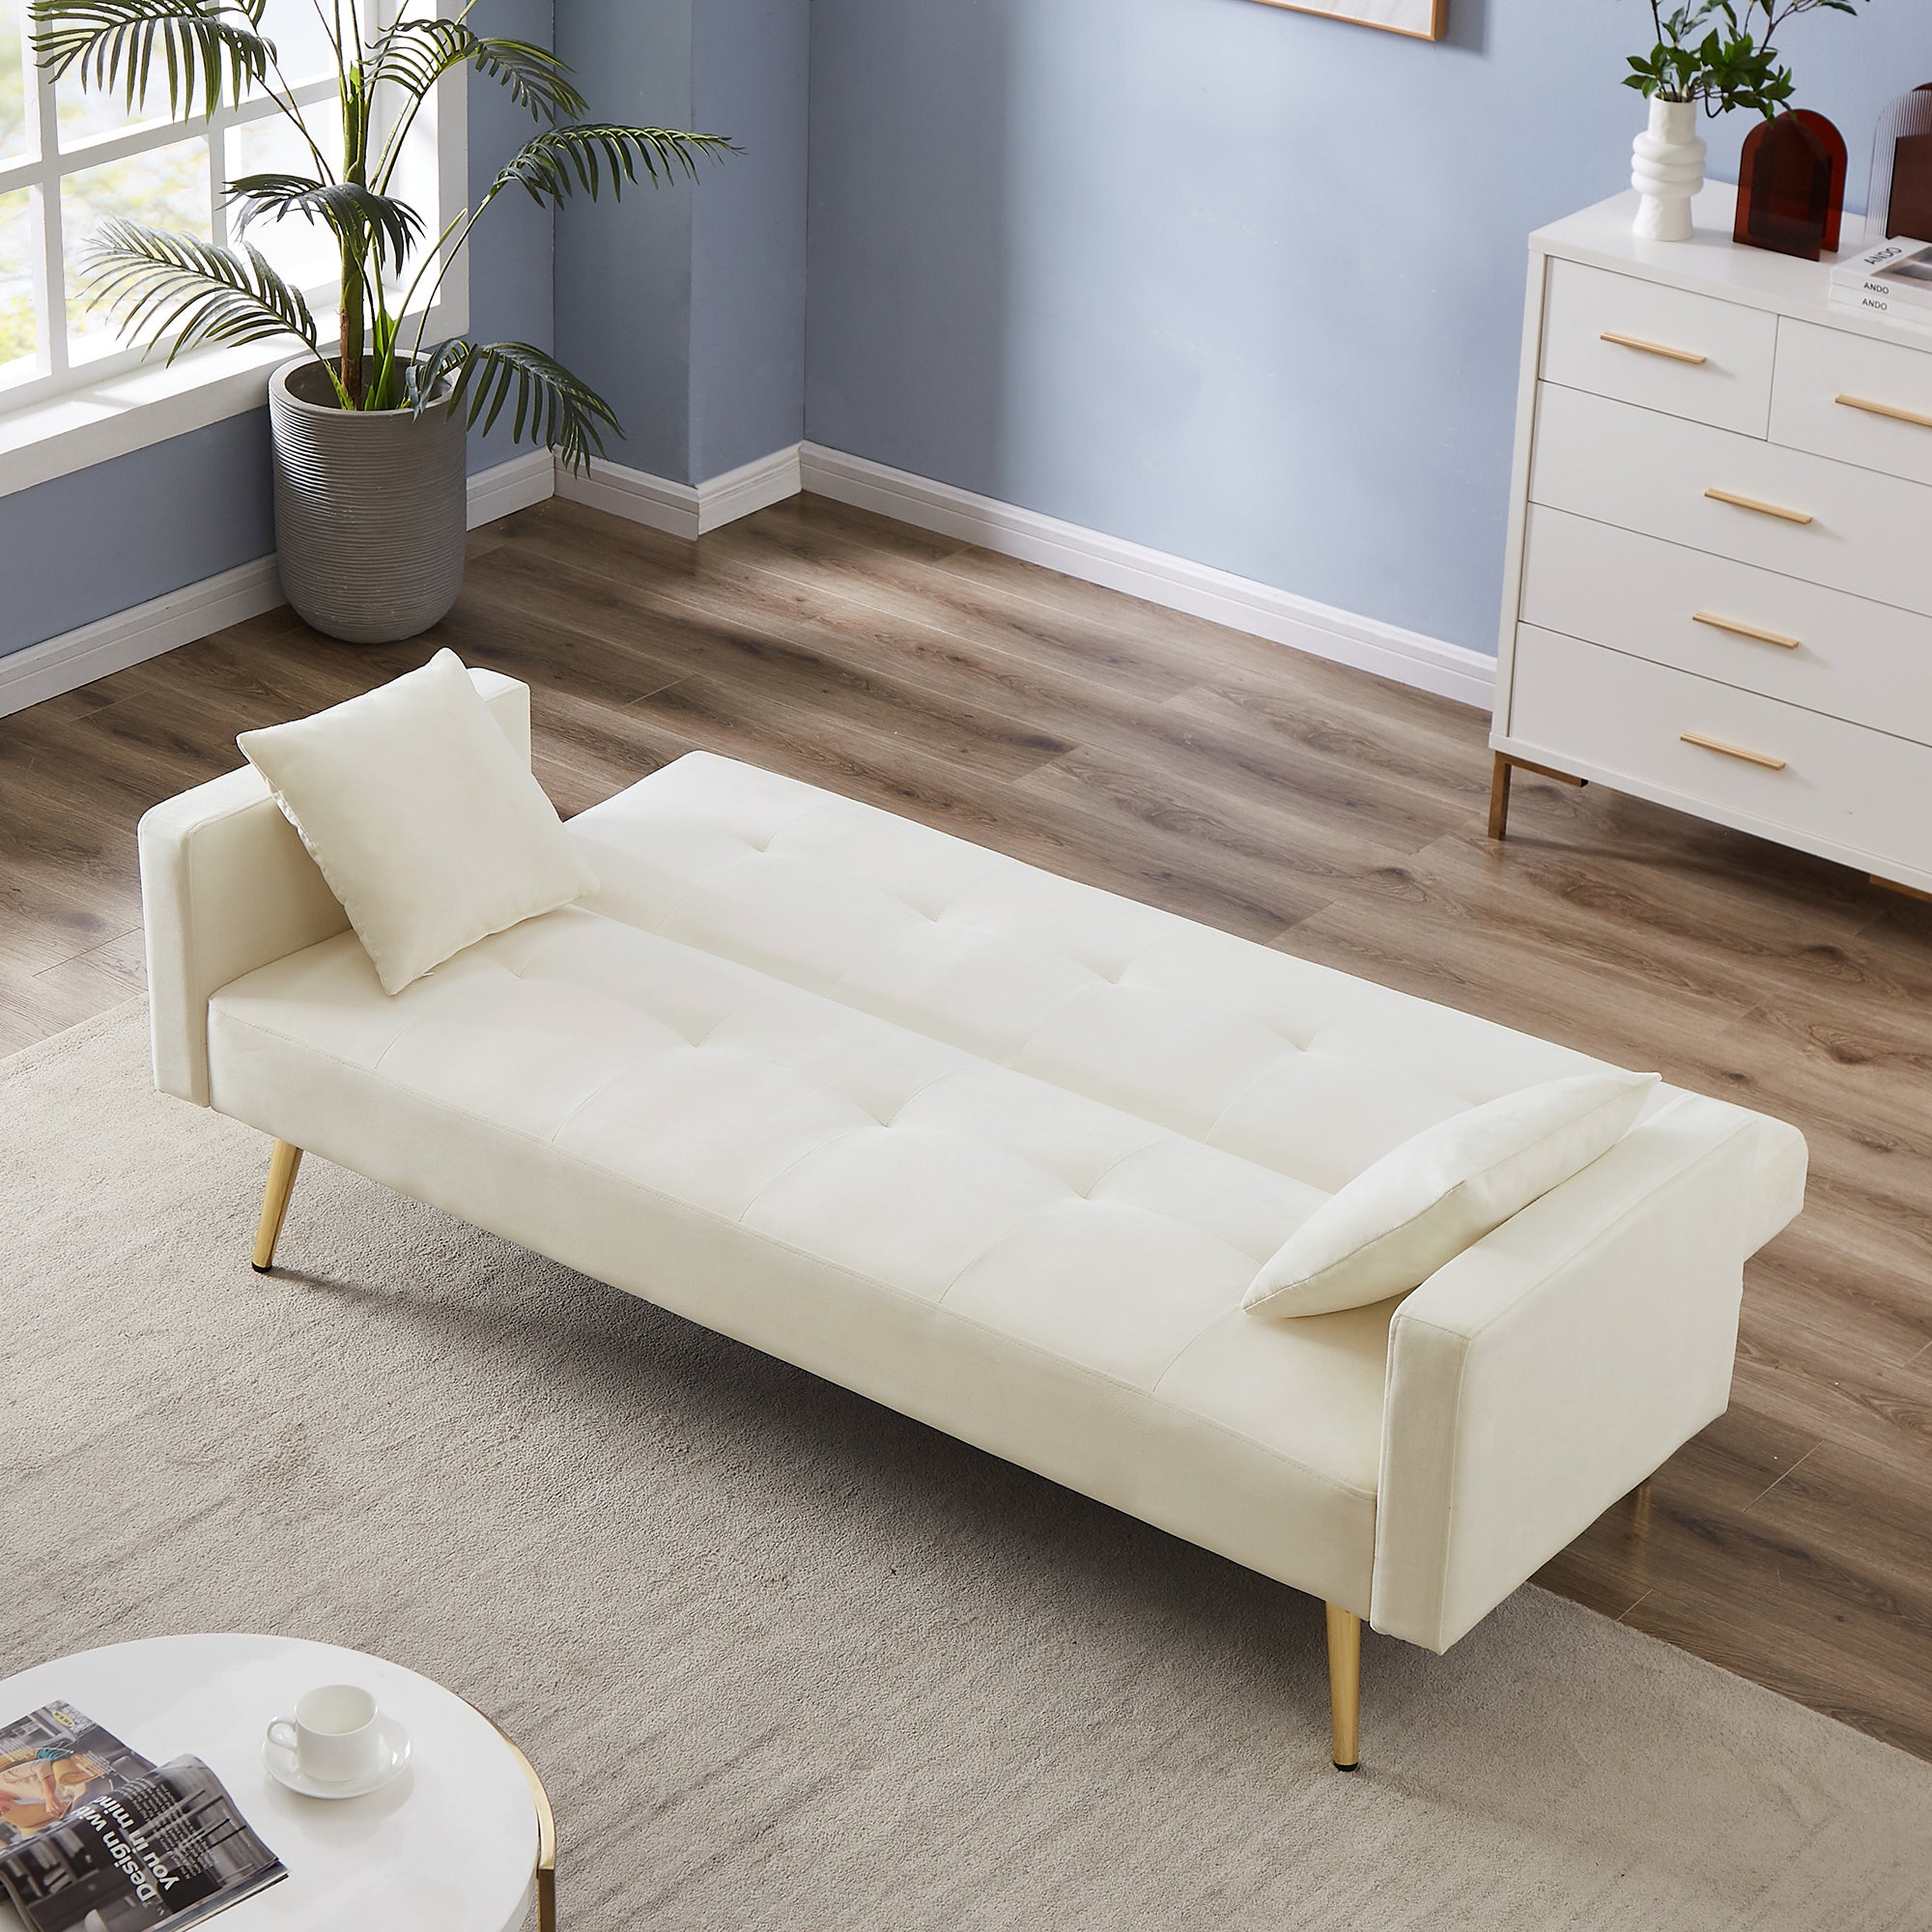 Cream White Velvet  Convertible Folding Futon Sofa Bed , Sleeper Sofa Couch for Compact Living Space.